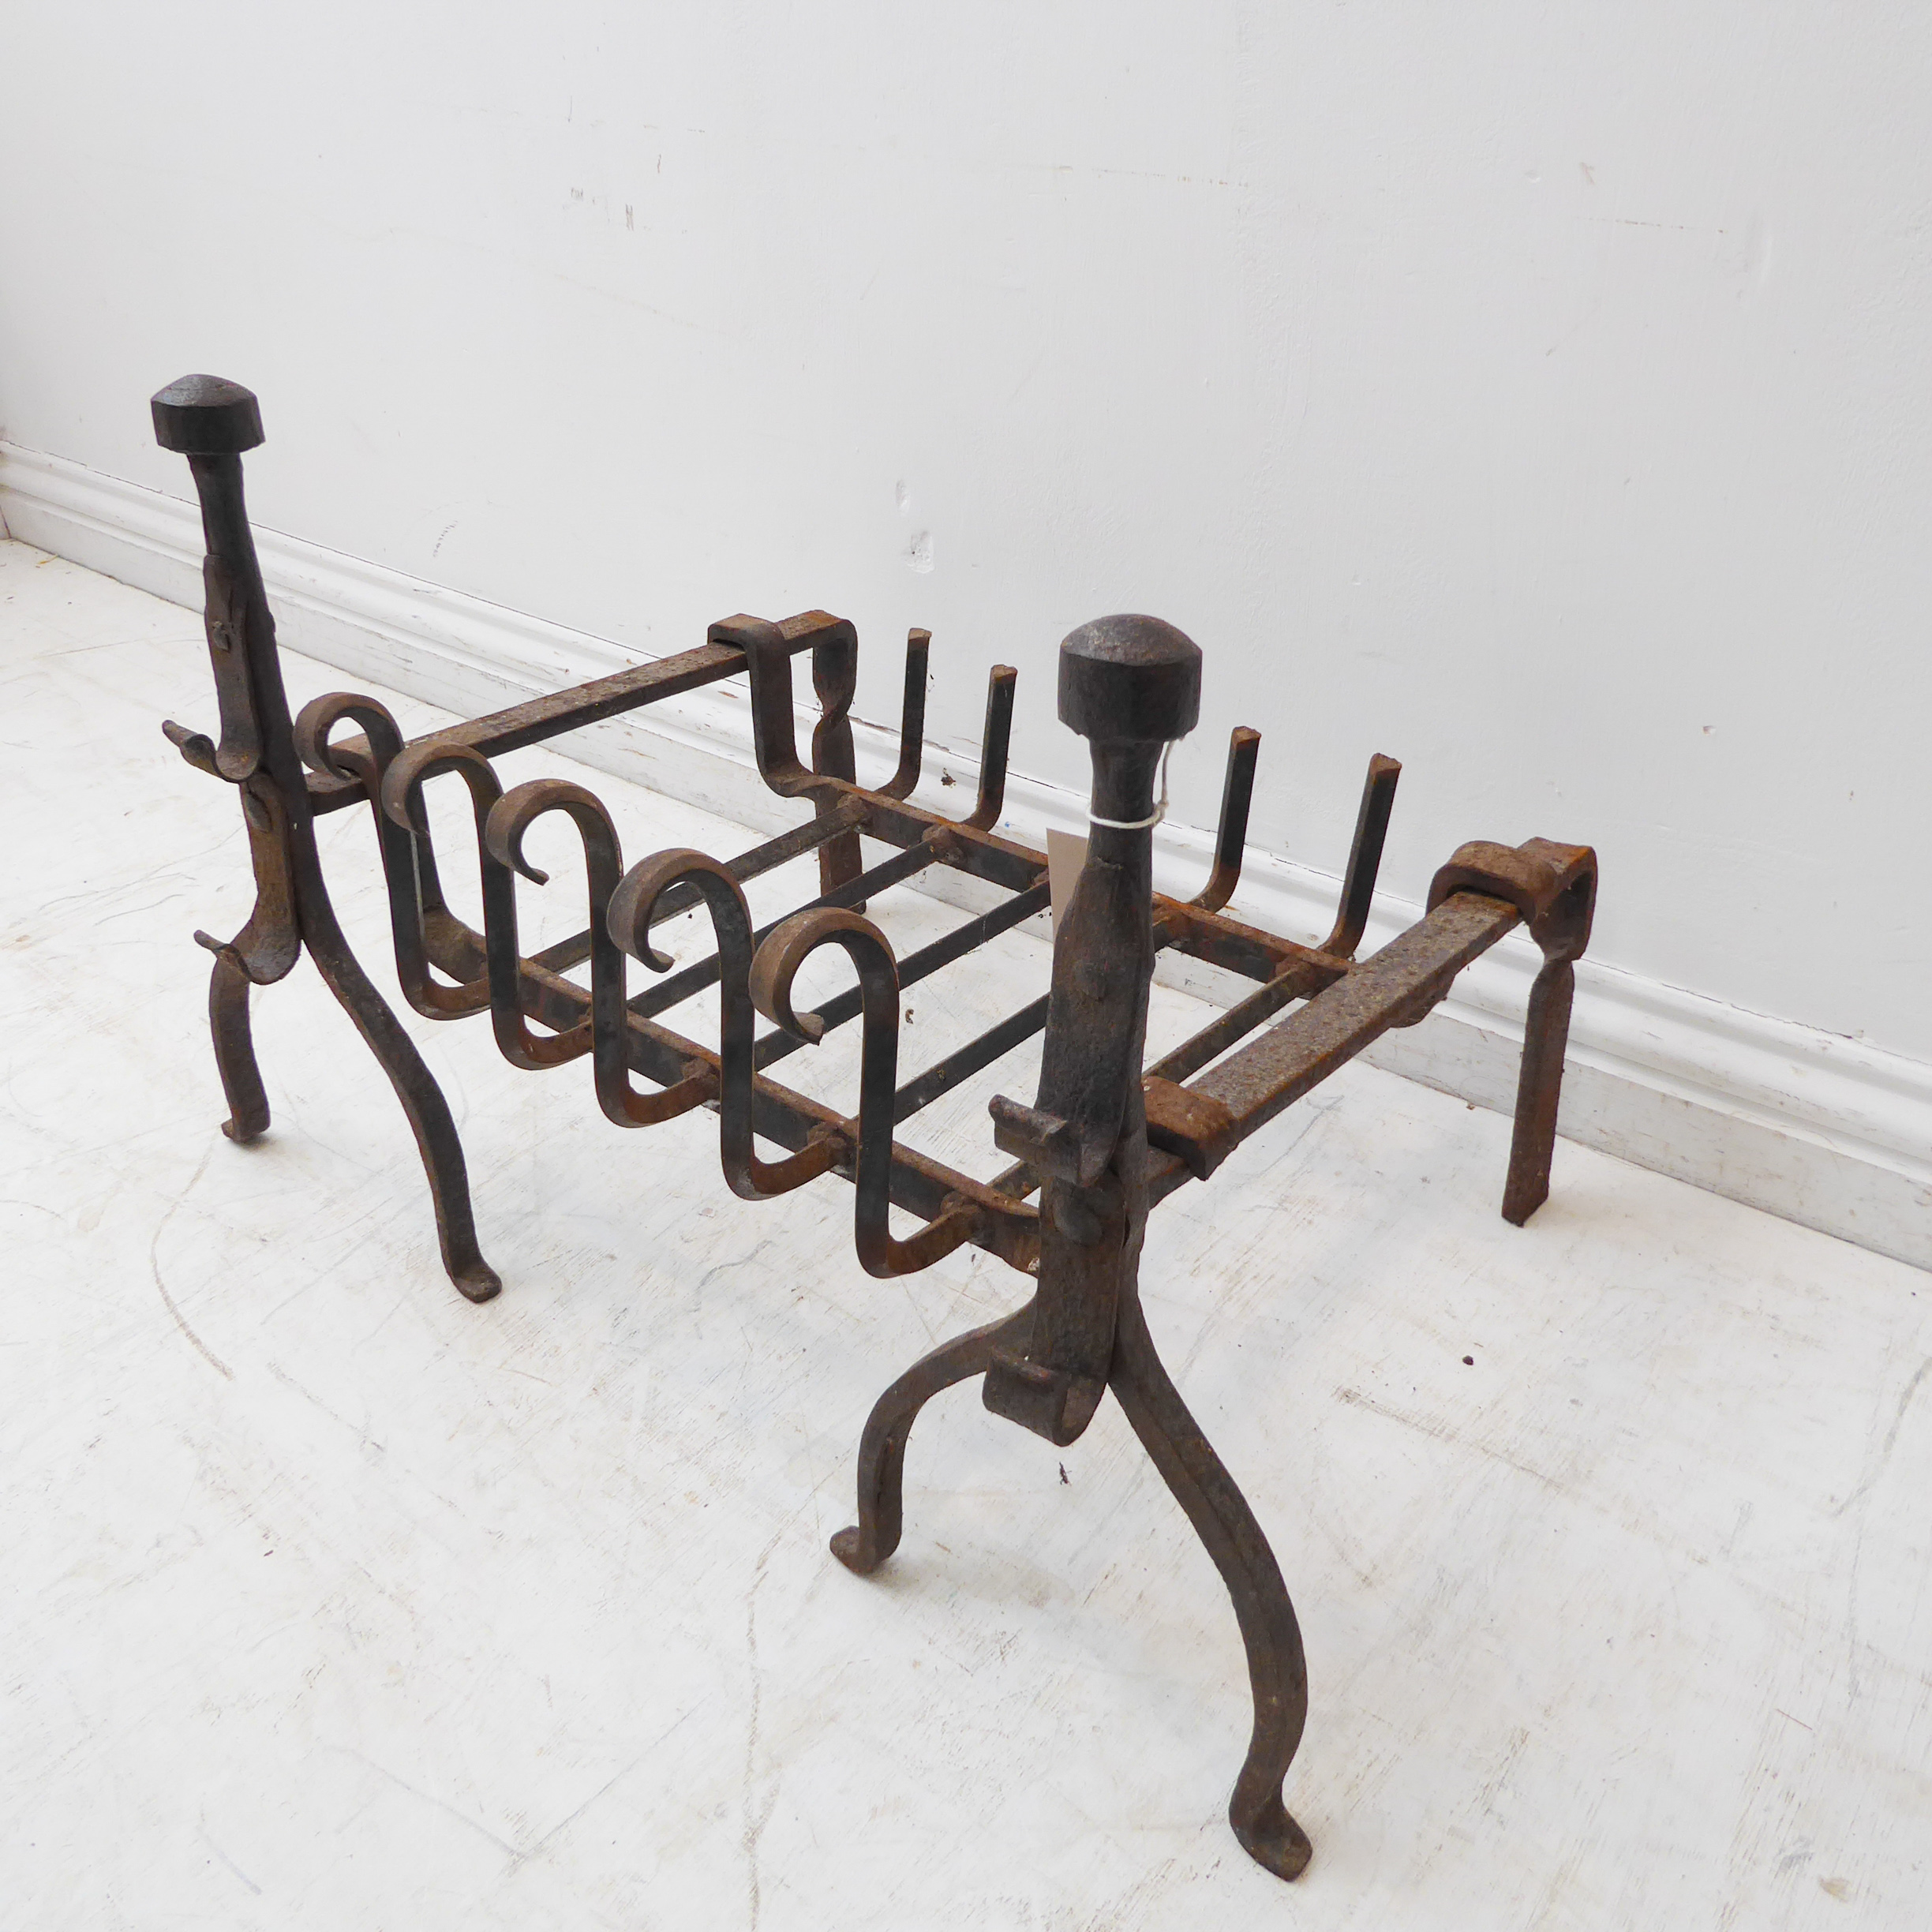 A 20th century blacksmith-made iron dog-grate and a pair of iron firedogs with iron rests and